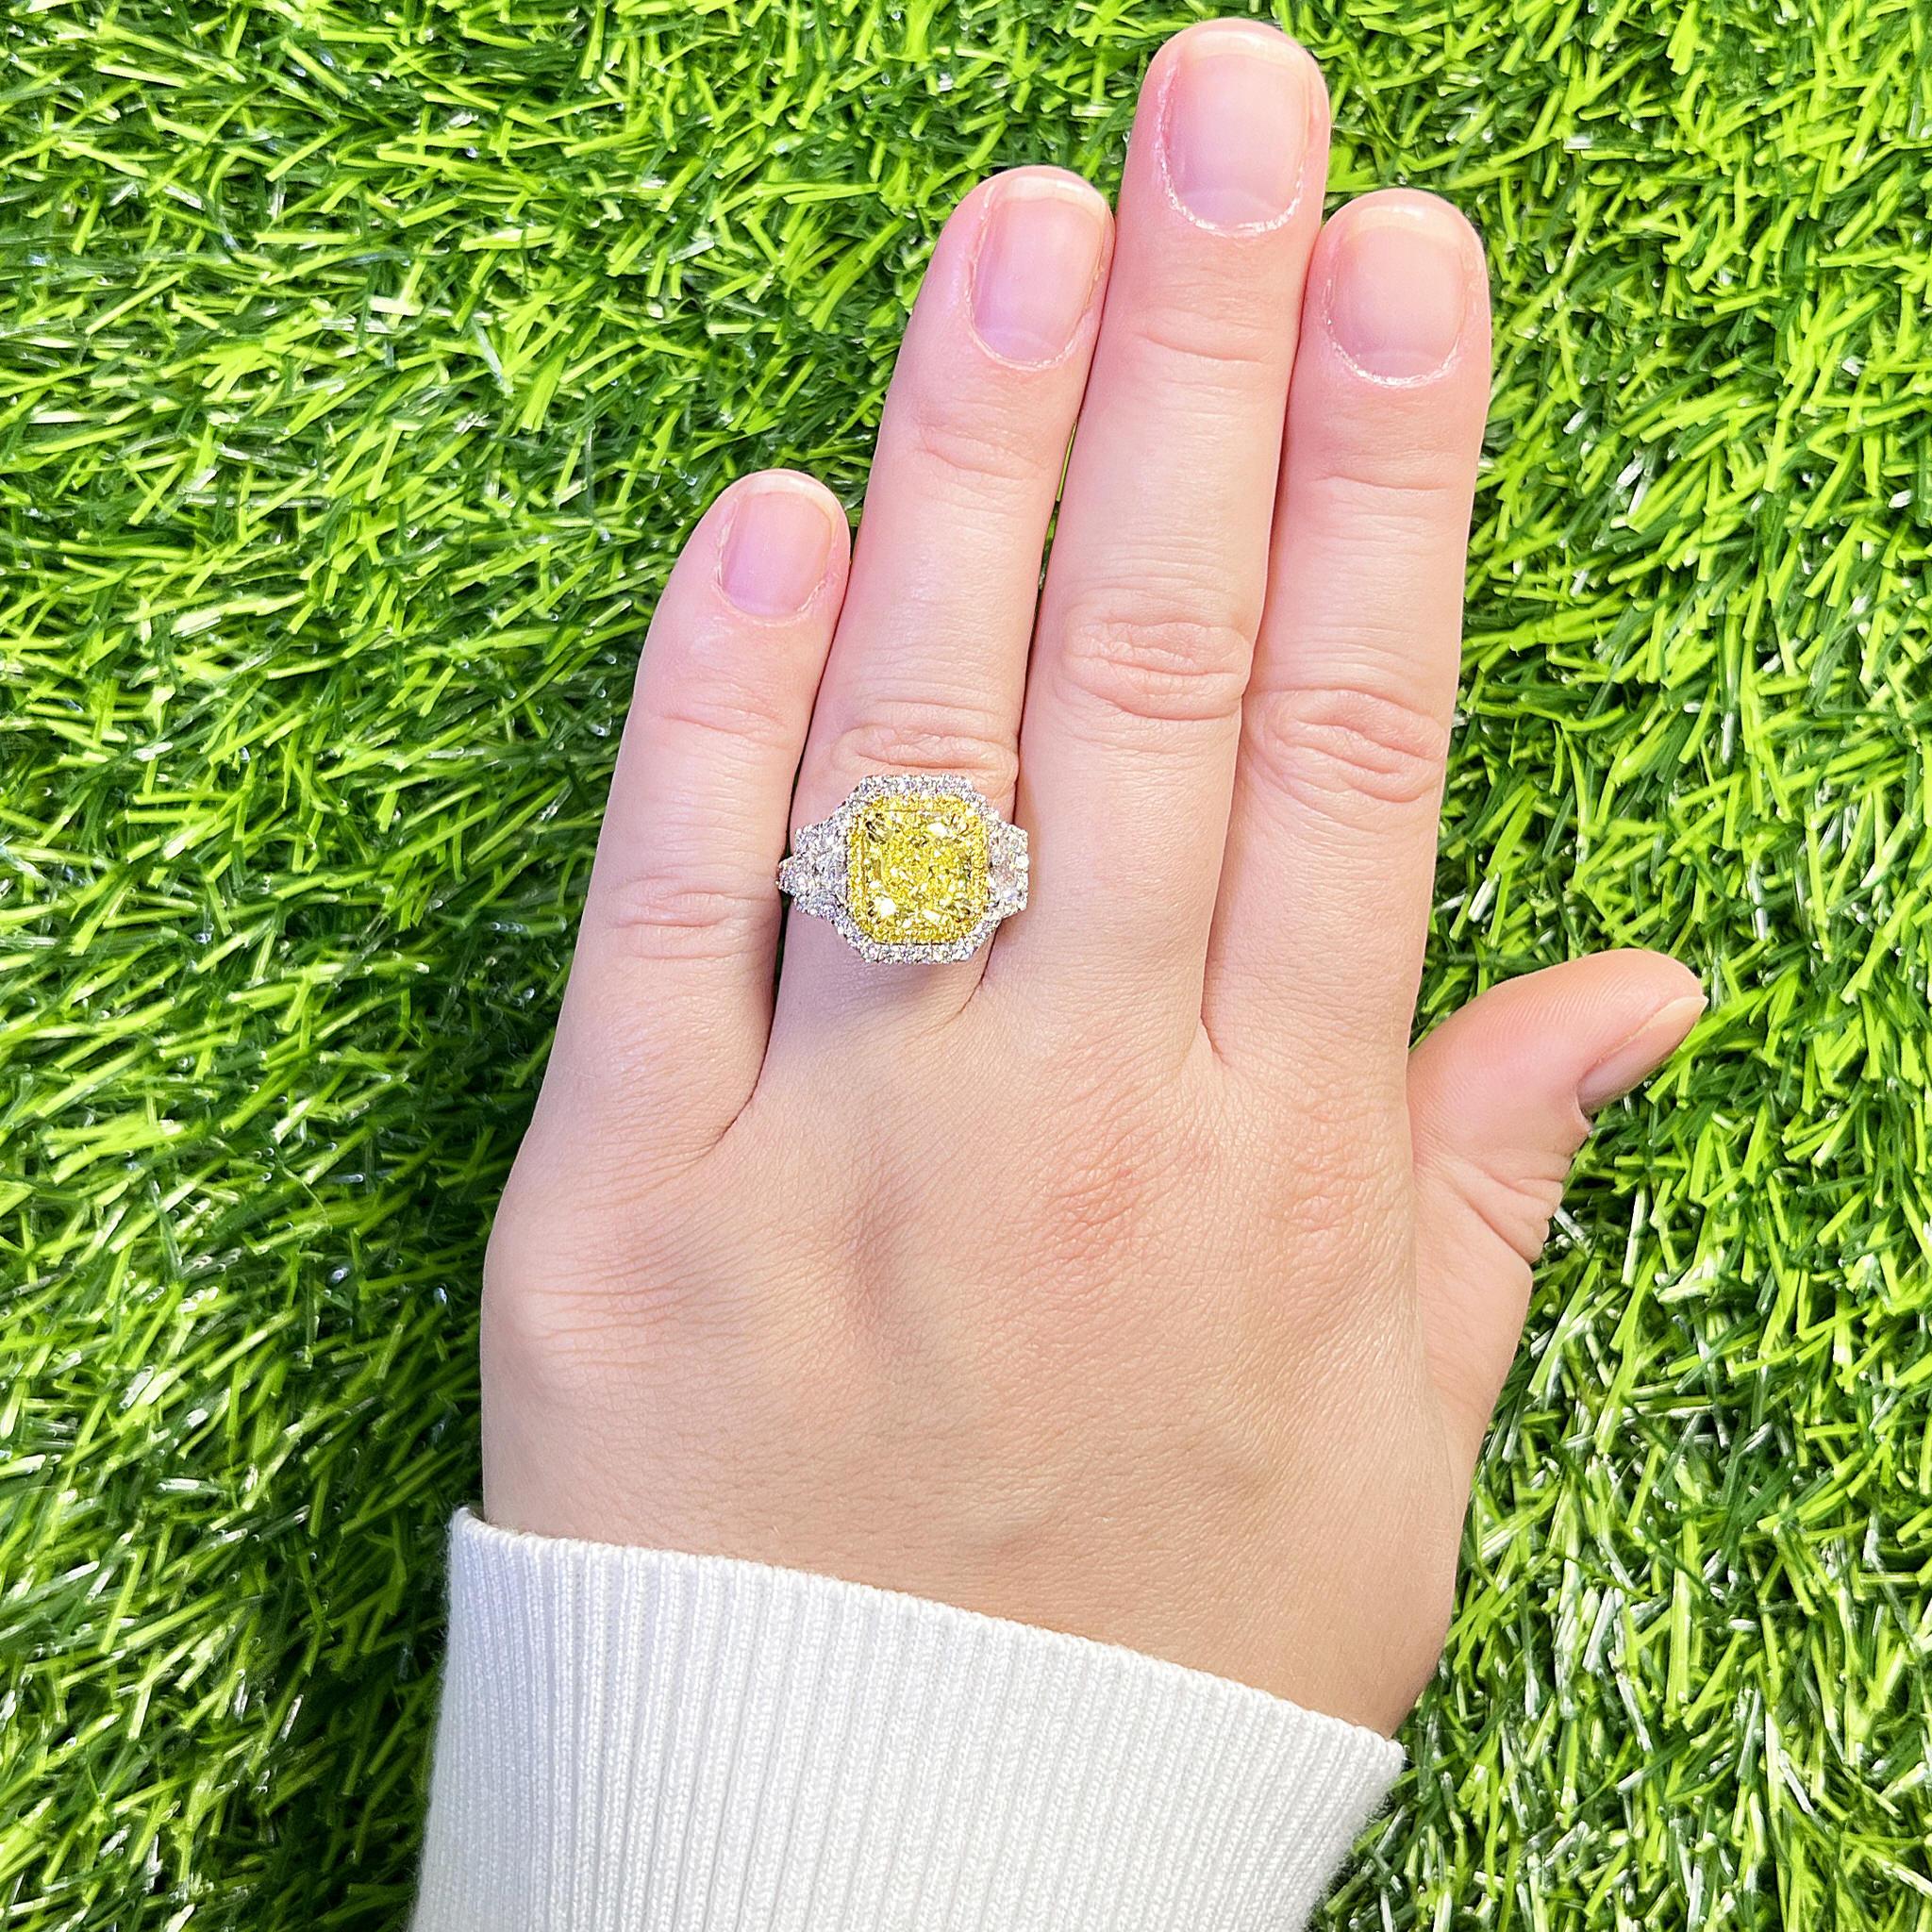 It comes with the GIA Laboratory Certificate
GIA Certified Natural Fancy Light Yellow Diamond = 3.52 Carat
Cut: Radiant, Clarity: VS1
30 Fancy Yellow Diamonds = 0.17 Carats
2 Trapezoid Diamonds = 0.67 Carats
62 Round Diamonds = 0.87 Carats
All